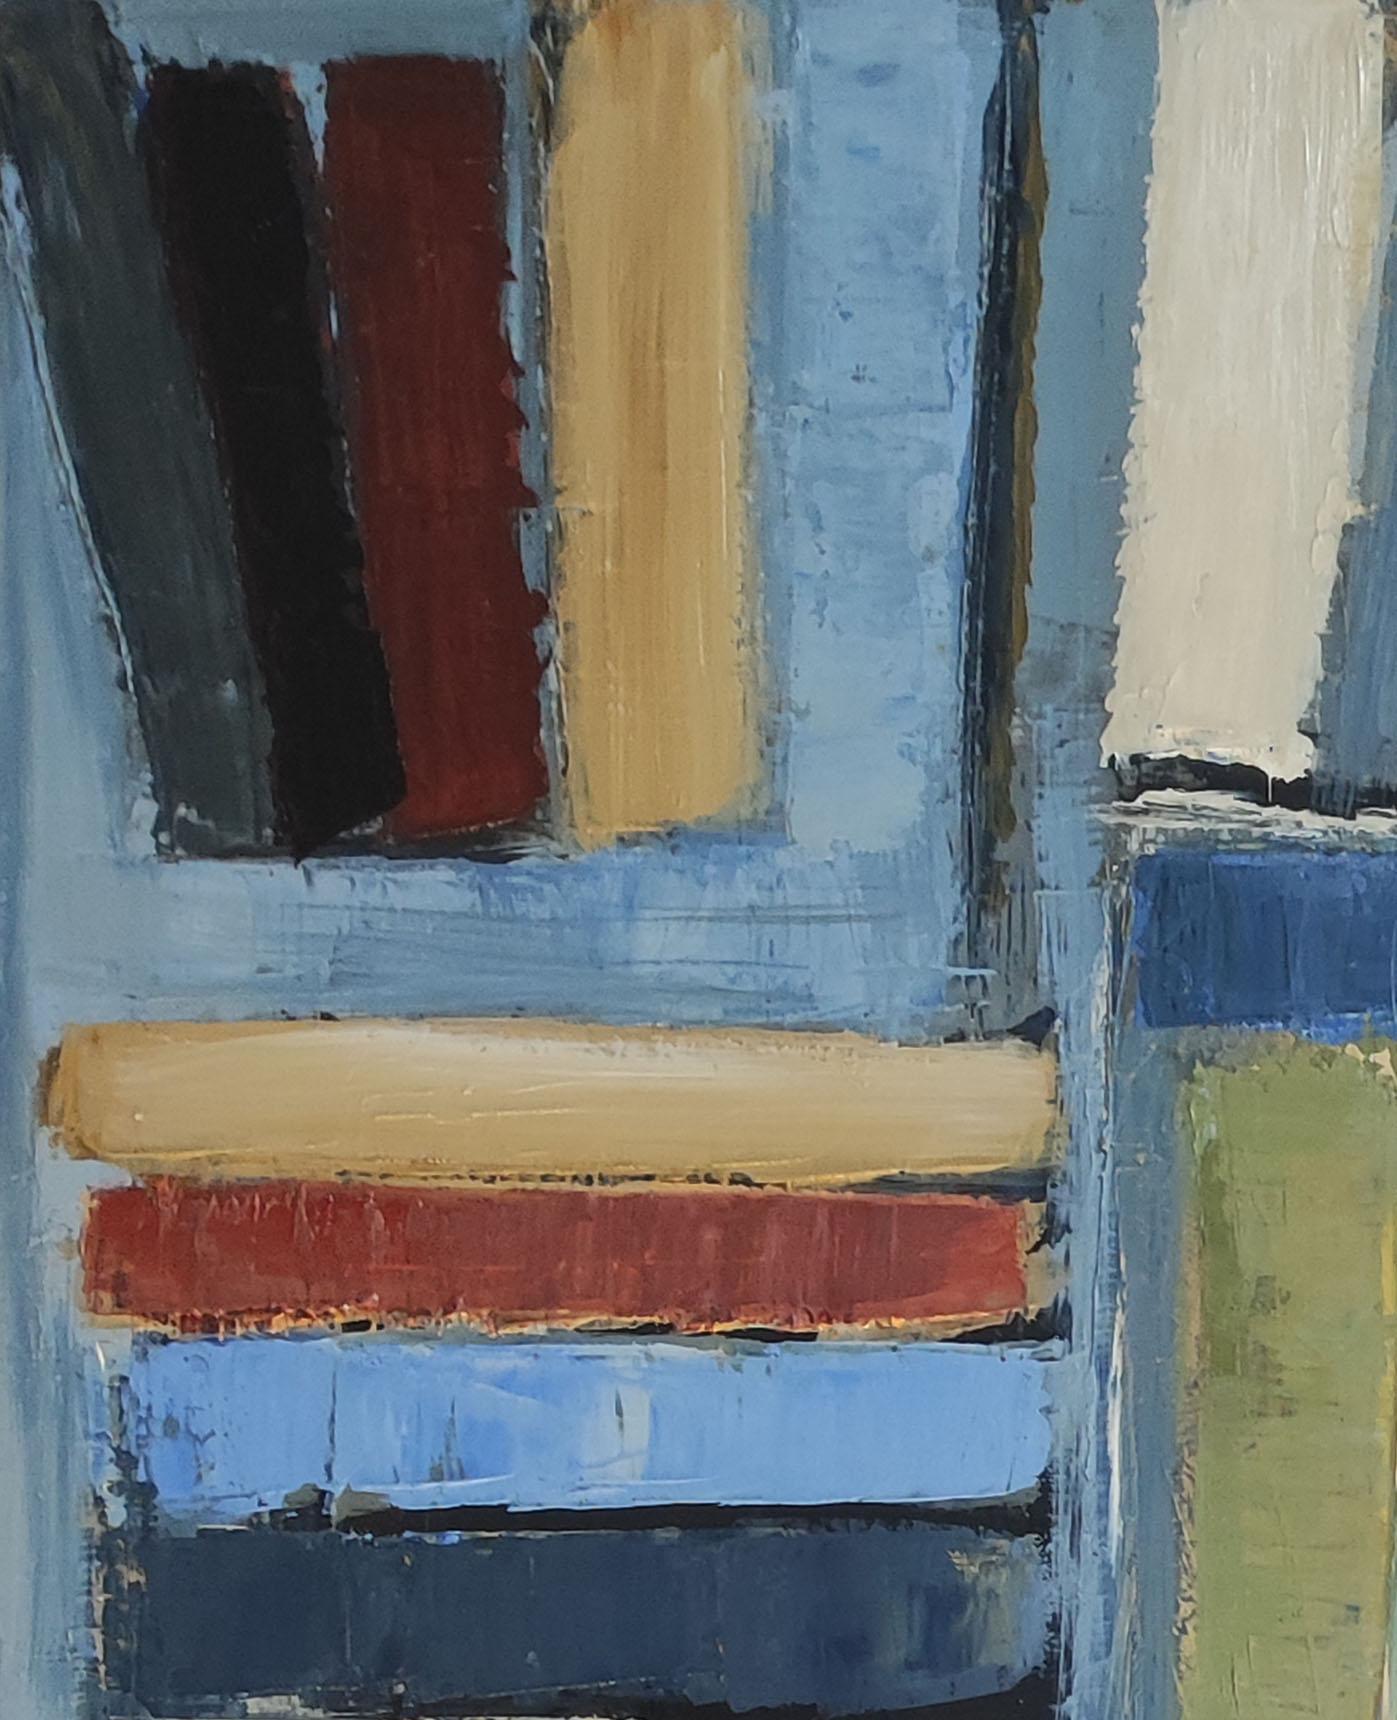 library 2, colors books in library, abstract, expressionism, oil on canvas 13